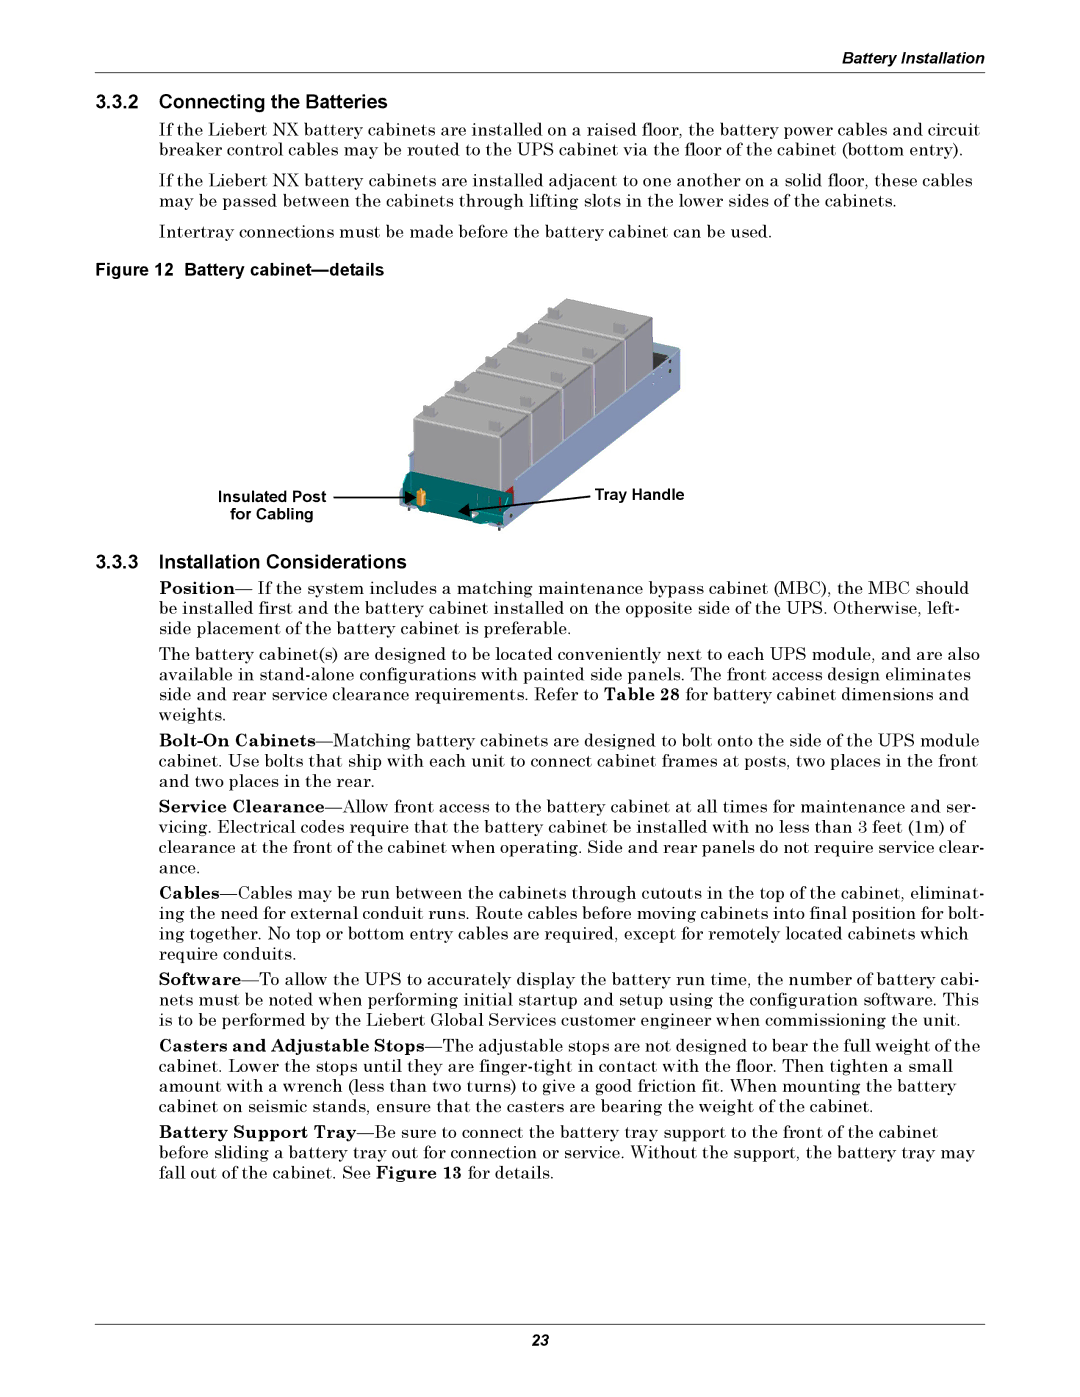 Emerson 480V user manual Connecting the Batteries, Installation Considerations, Insulated Post Tray Handle For Cabling 